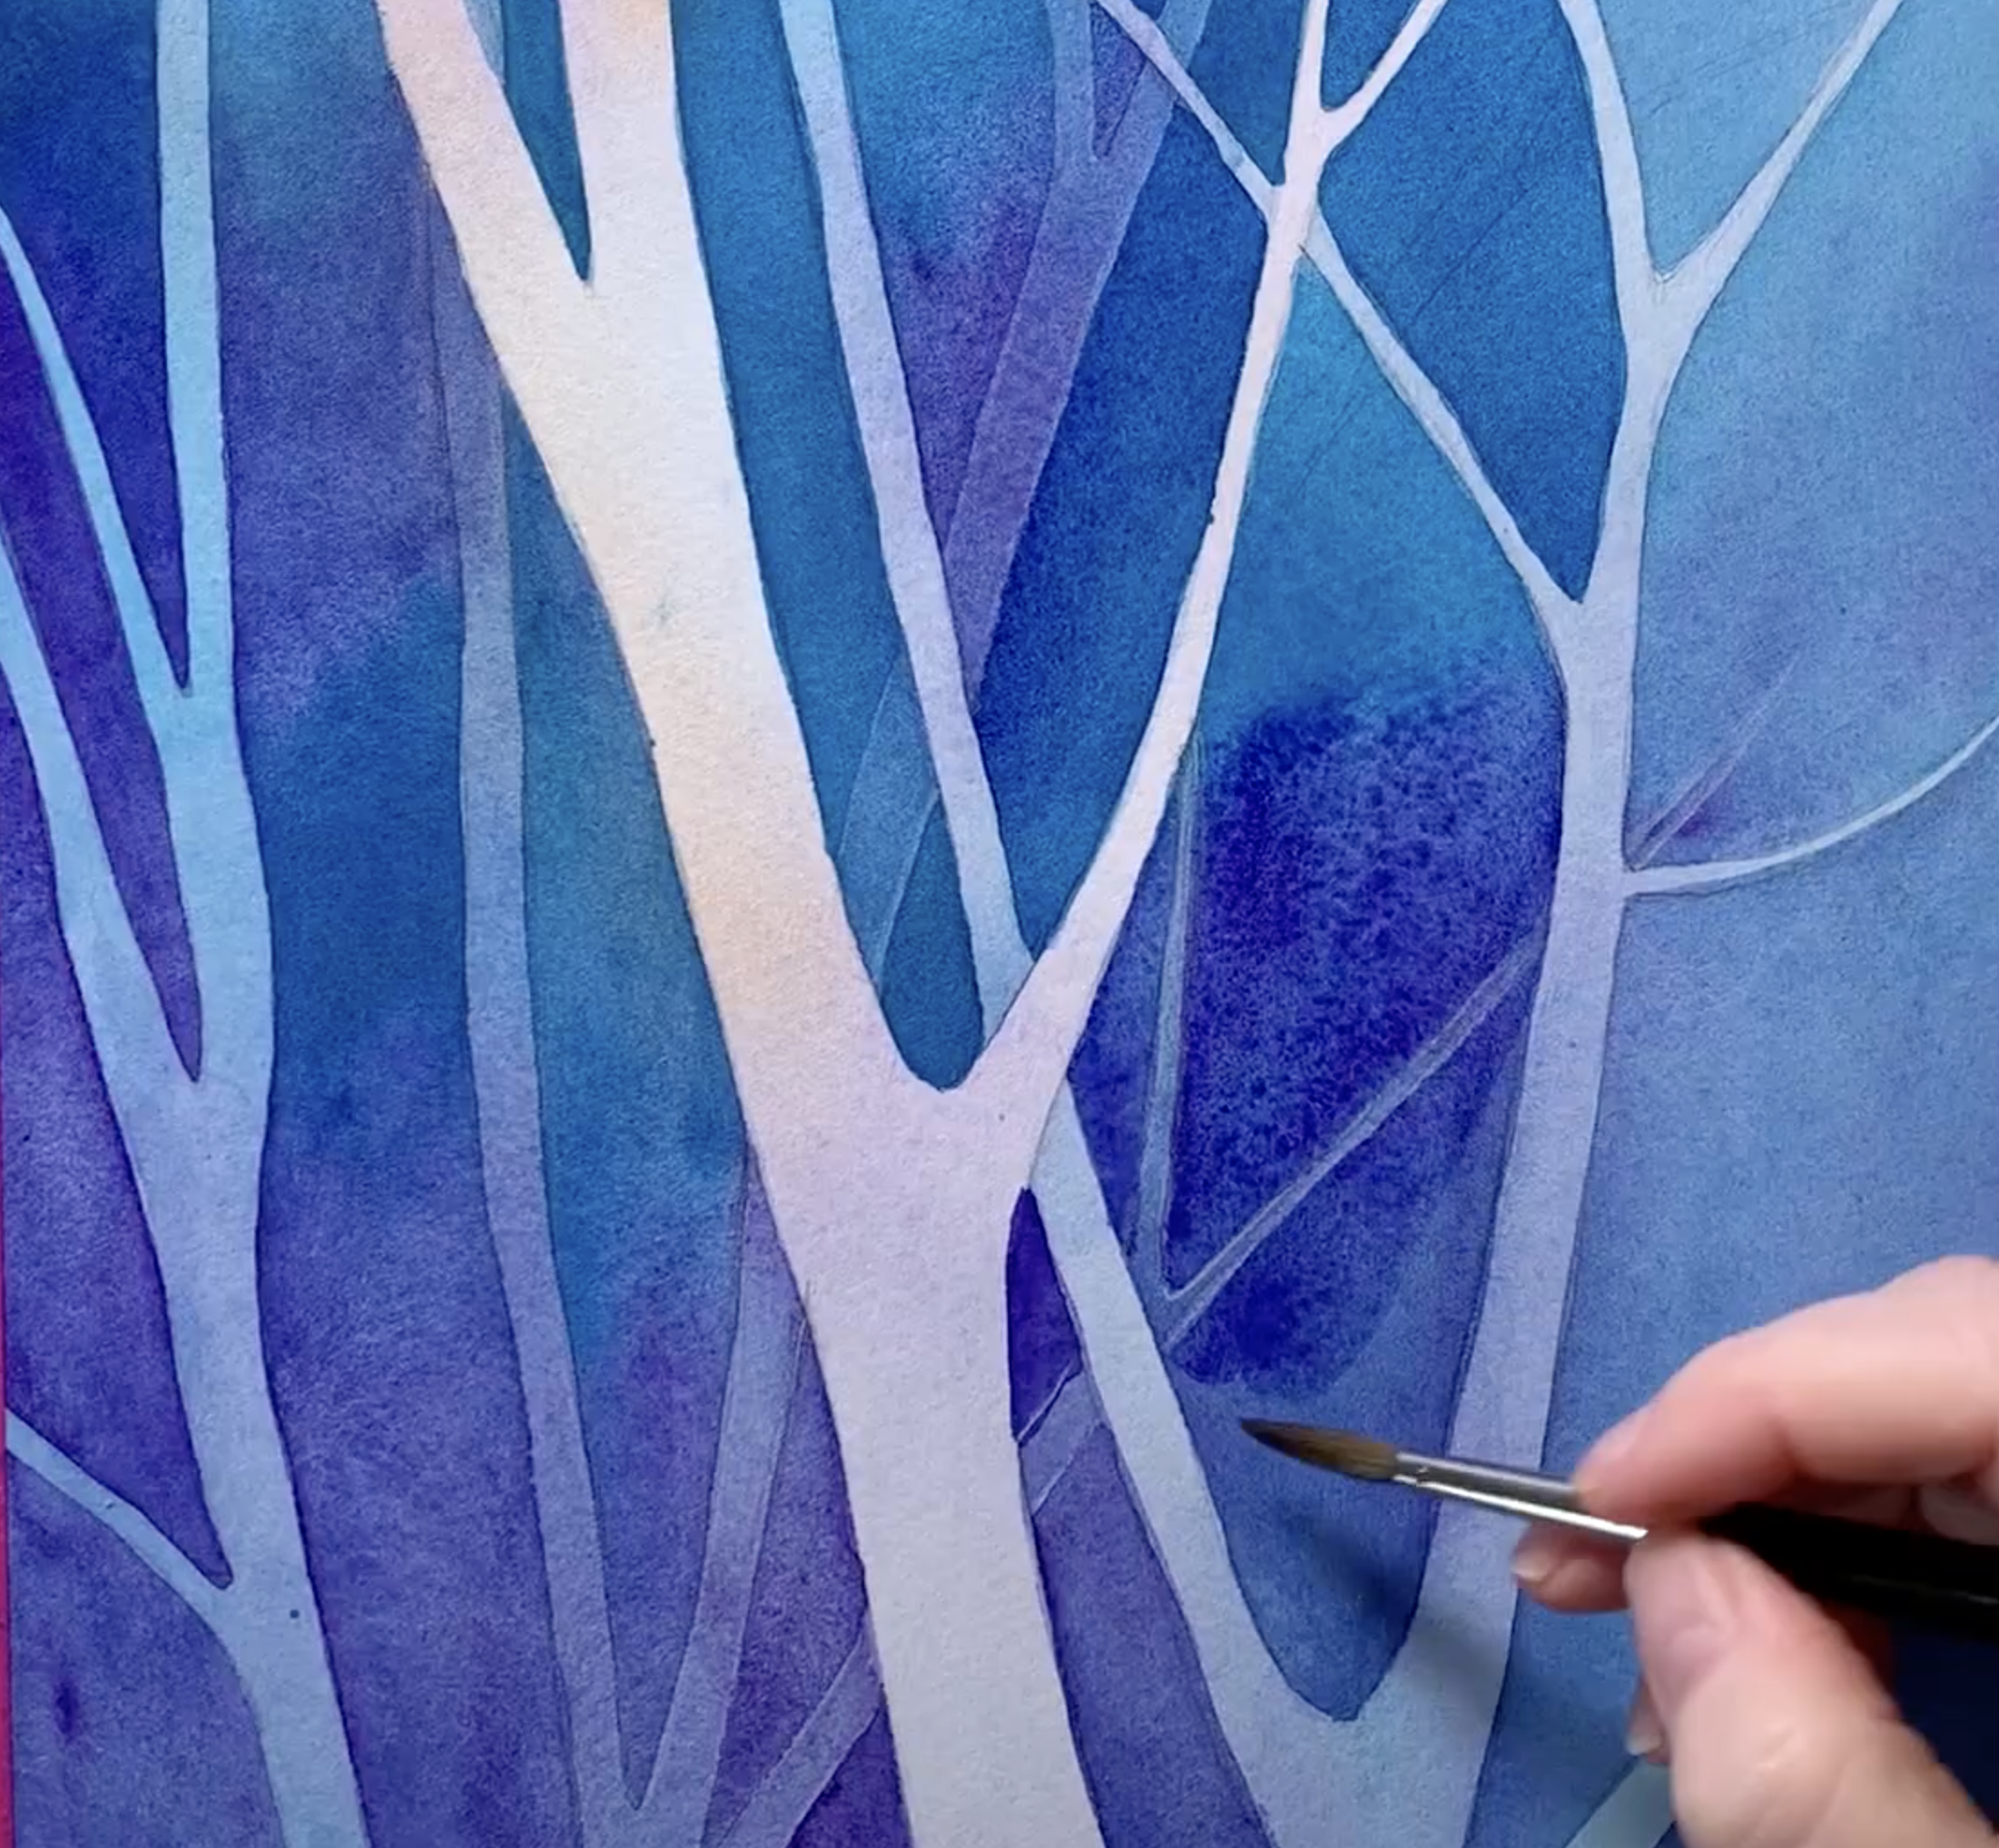 Watercolor Negative Painting Tutorial - Add Amazing Depth to Your Art